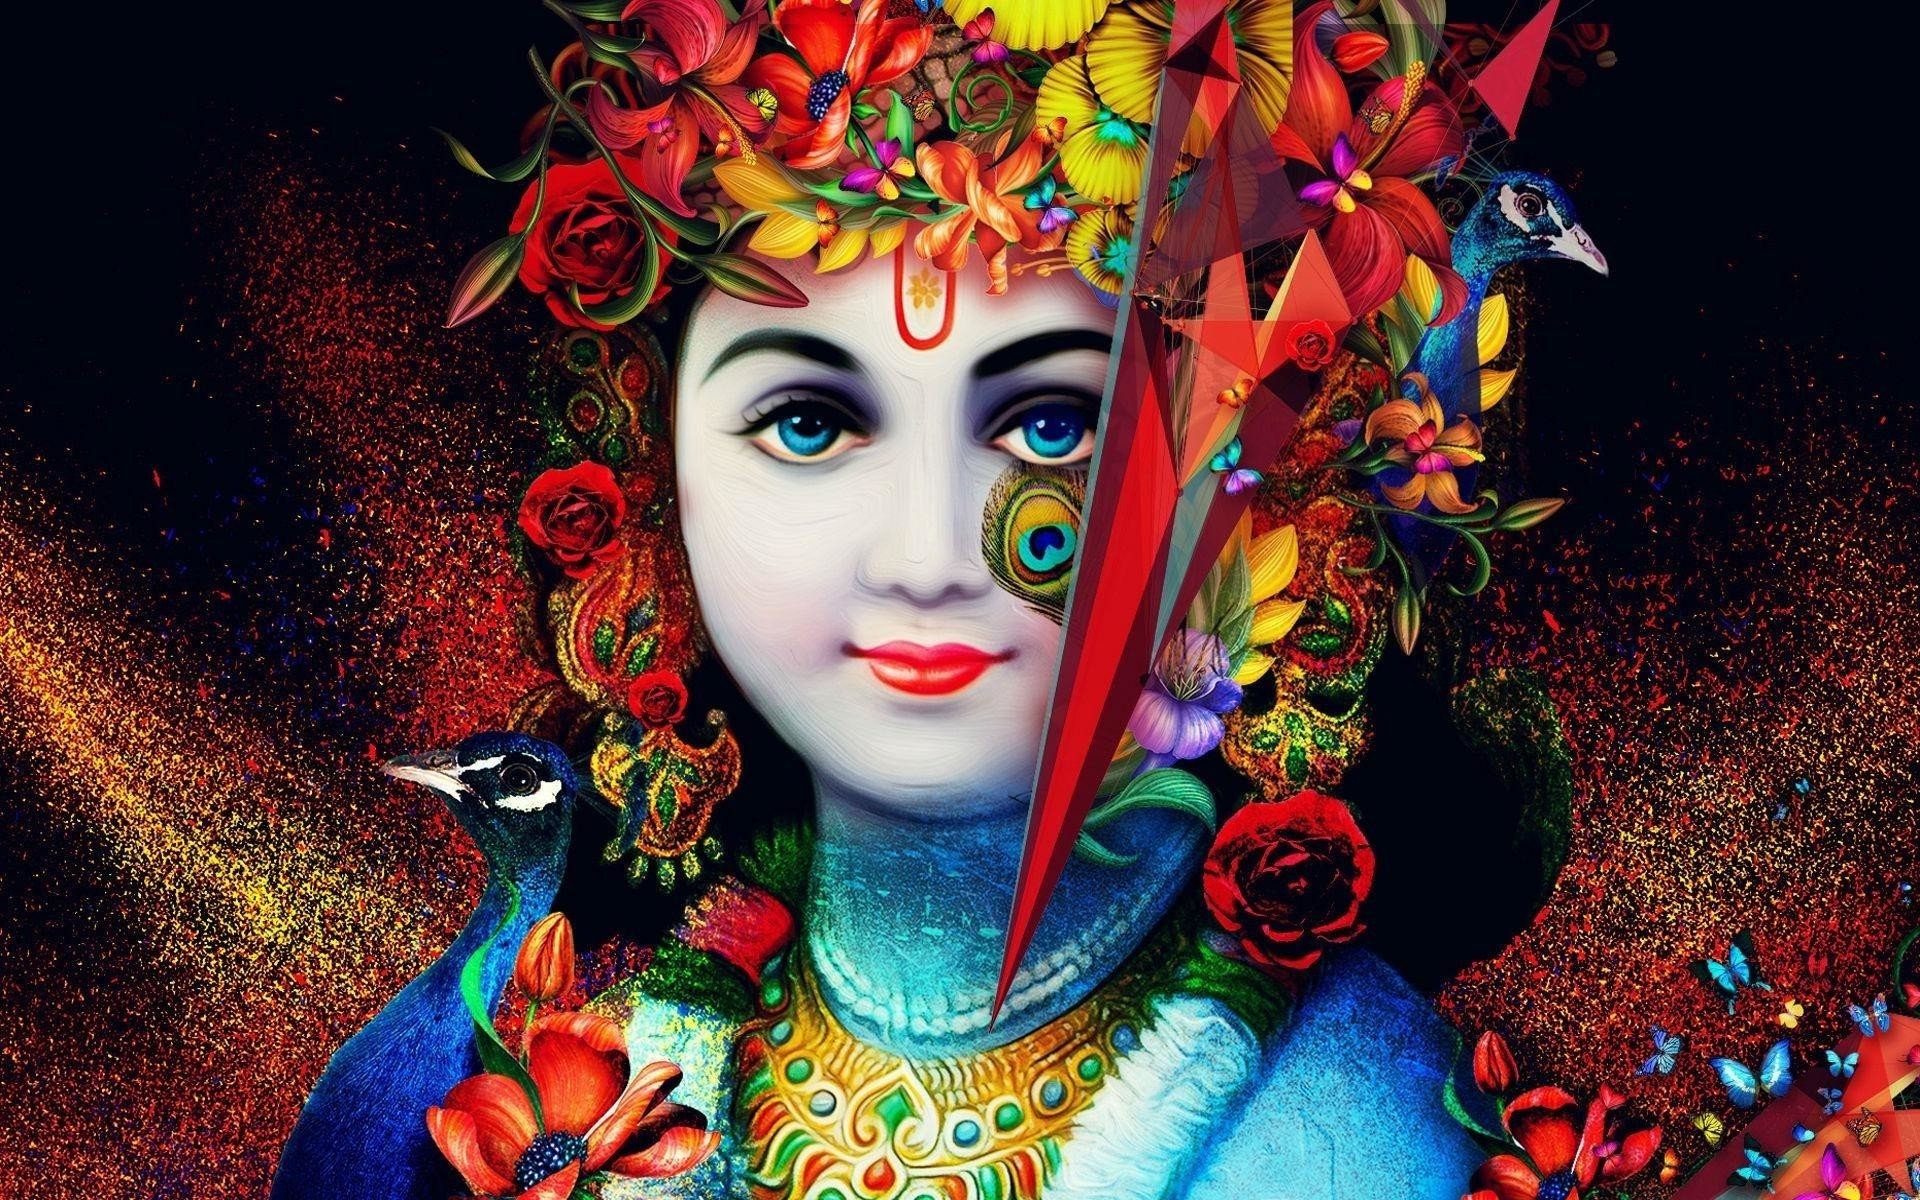 Lord Krishna Wallpaper 2018 (71+ pictures)